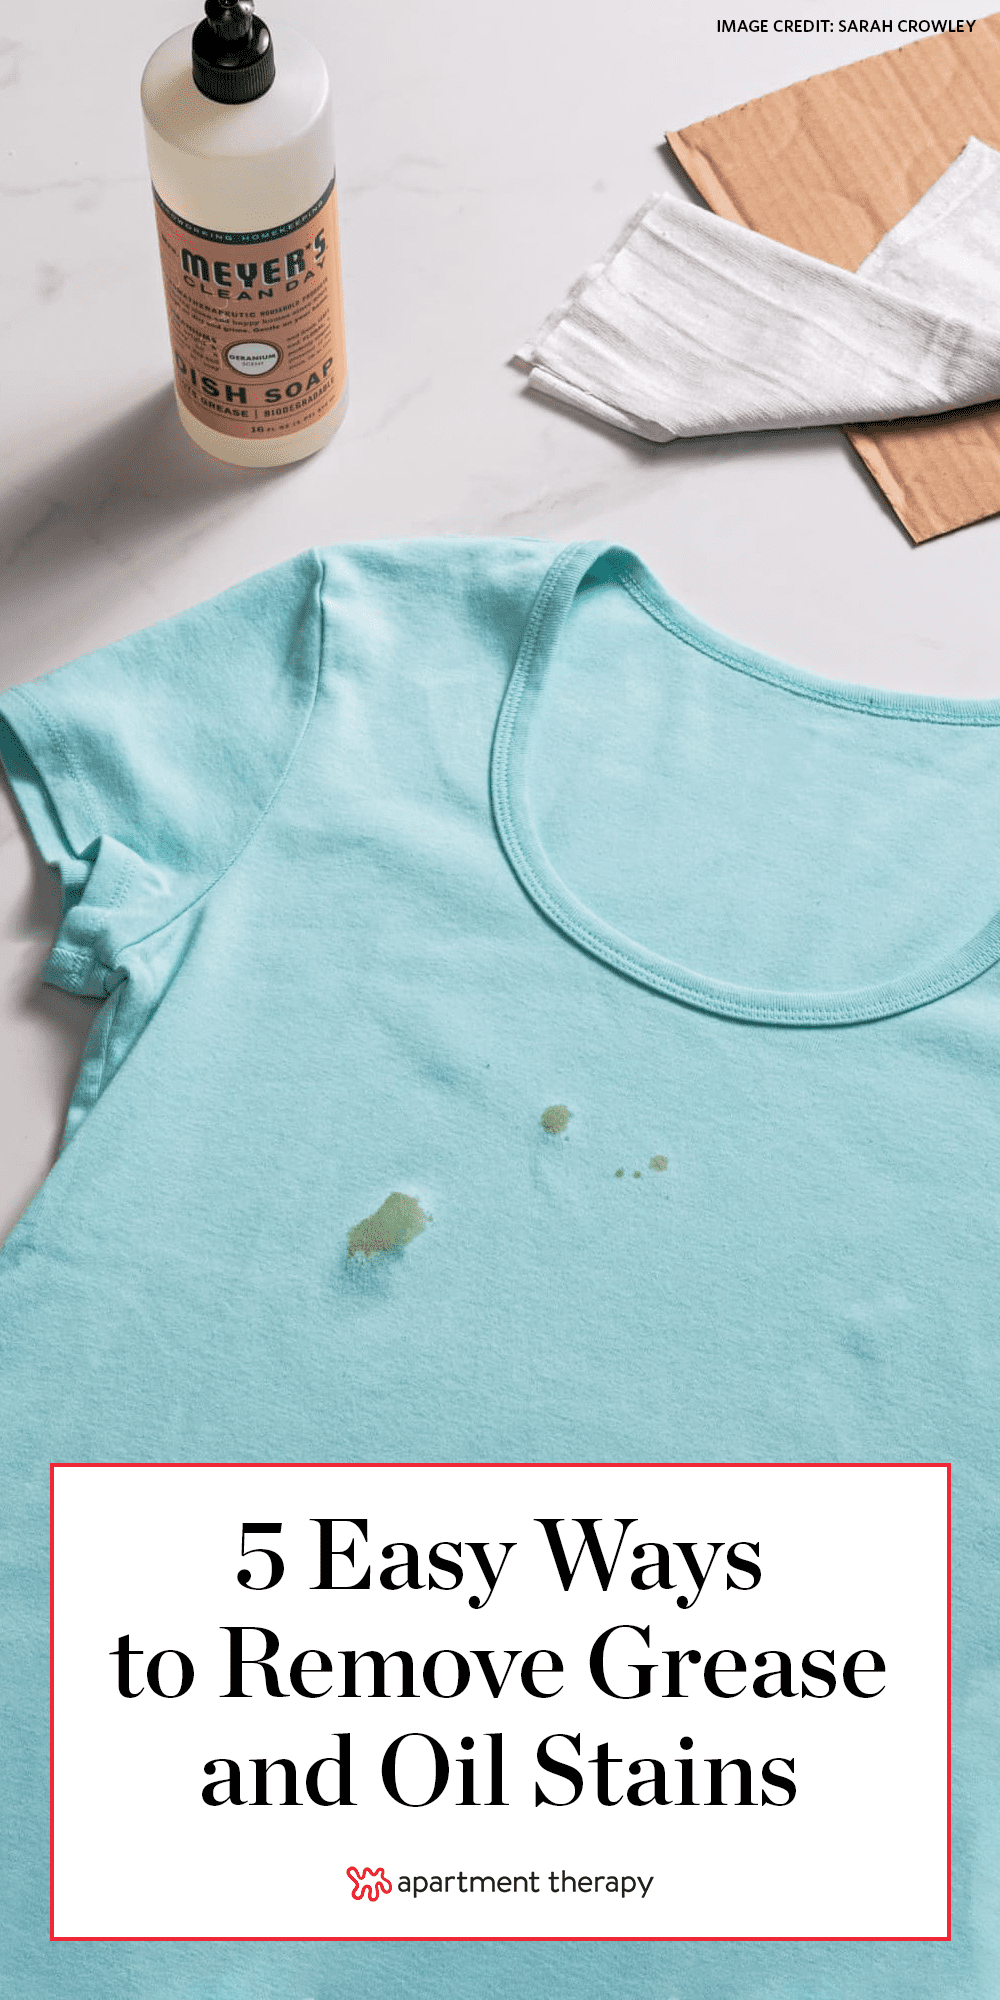 How to Get Oil Stains Out of Clothes, Step by Step With Pictures